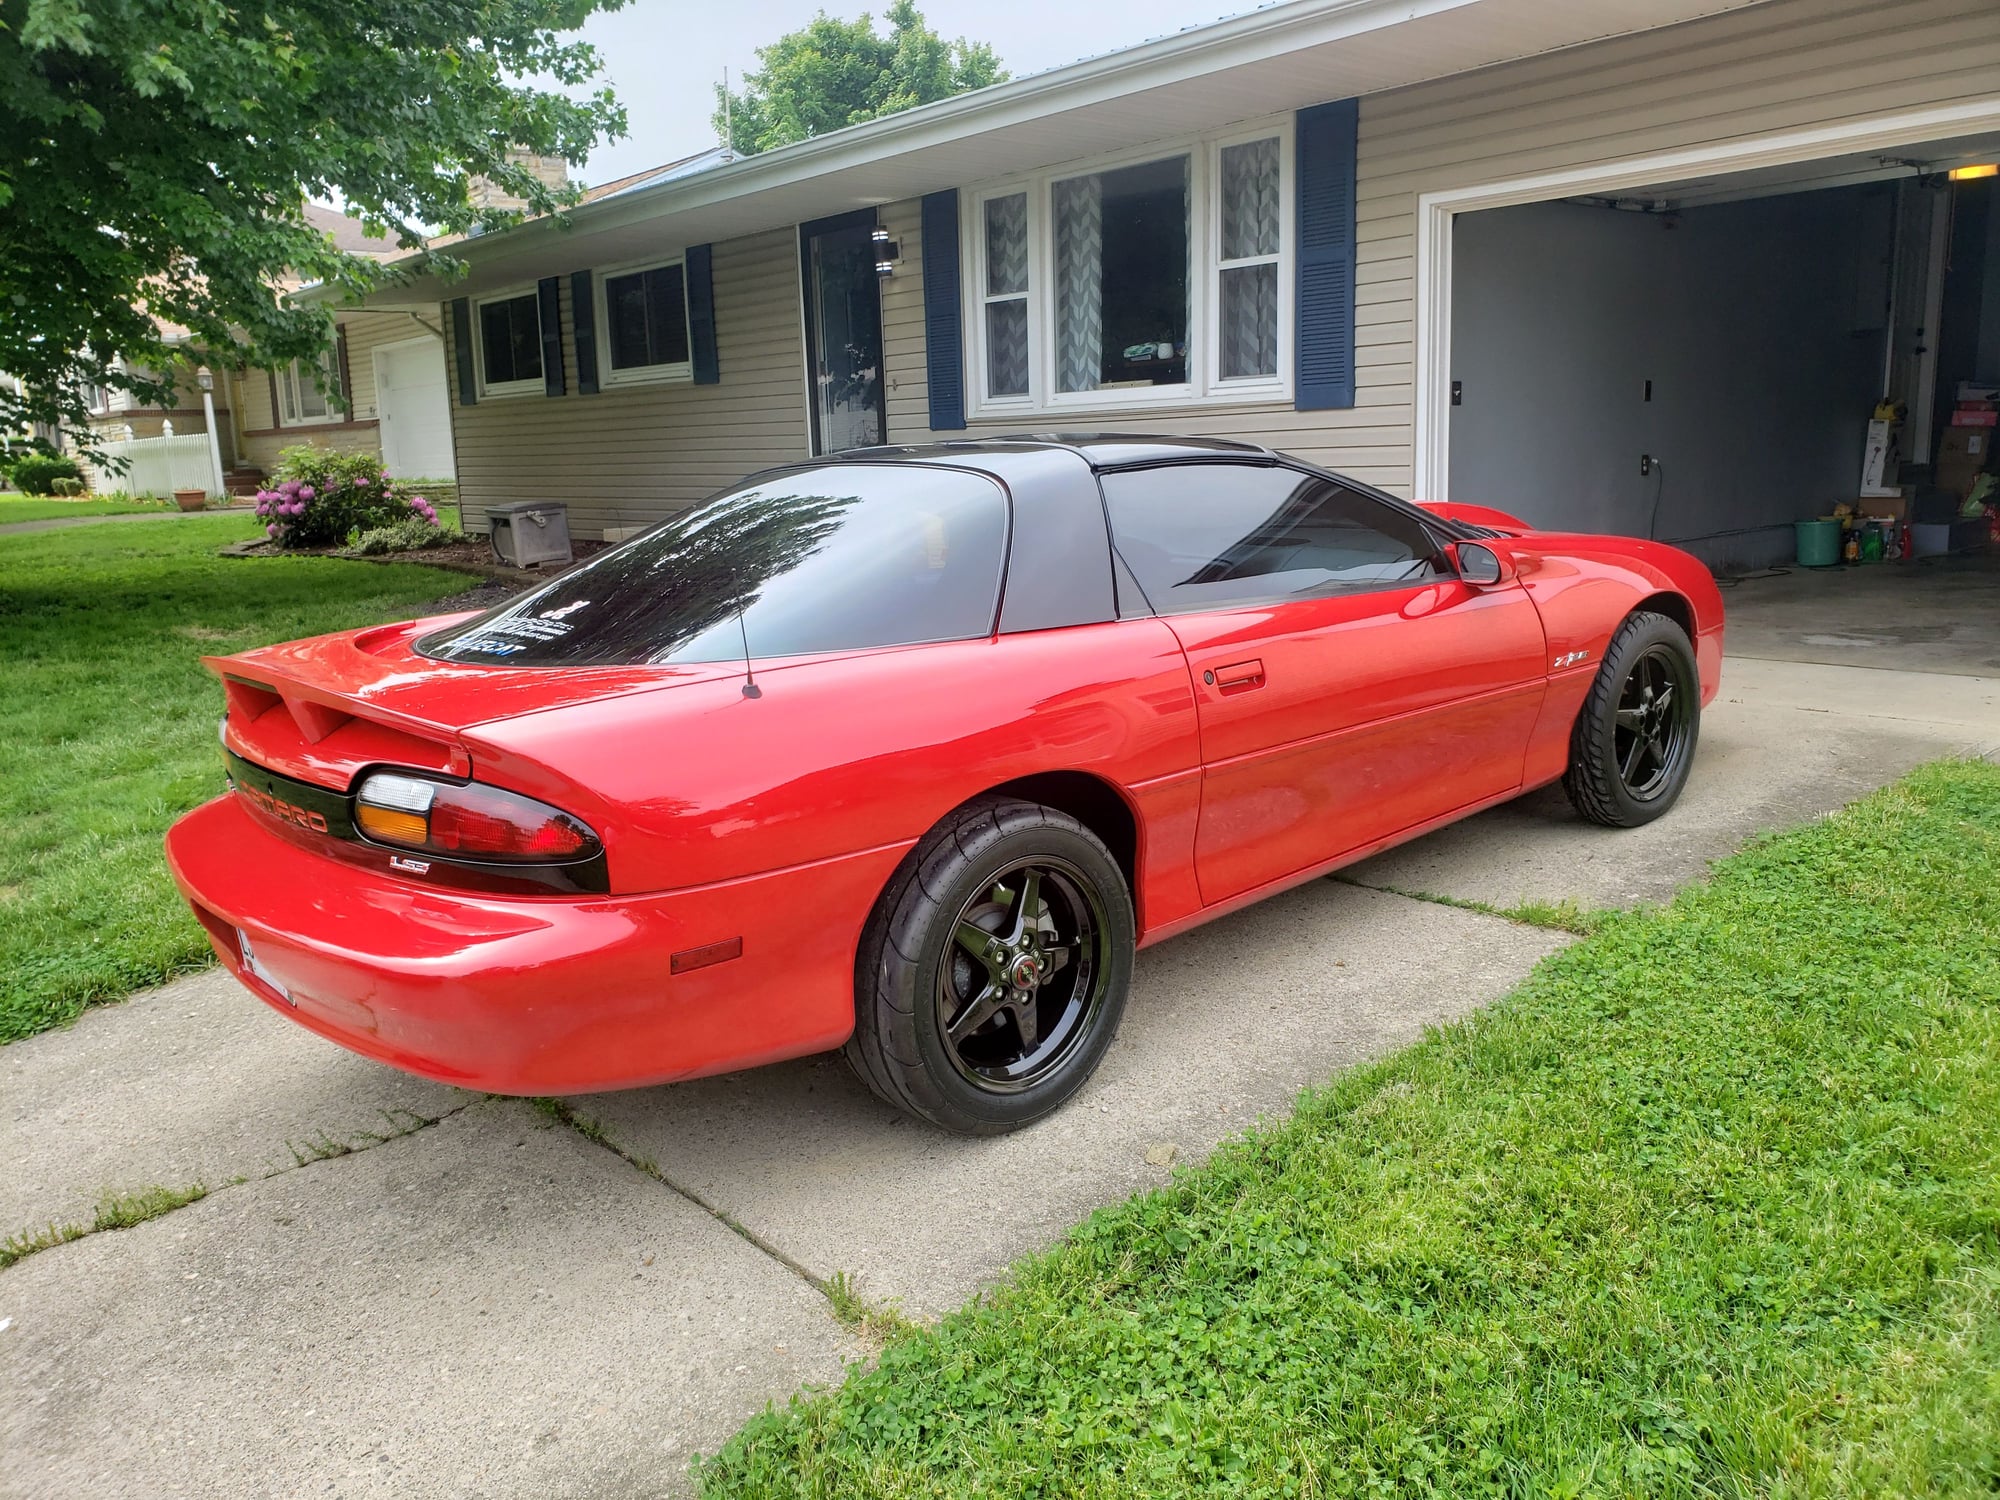 2001 Chevrolet Camaro - LS3 swapped 2001 Camaro Z28 - Used - VIN 2g1fp22g812147980 - 21,454 Miles - 8 cyl - 2WD - Automatic - Coupe - Red - Jackson, OH 45640, United States